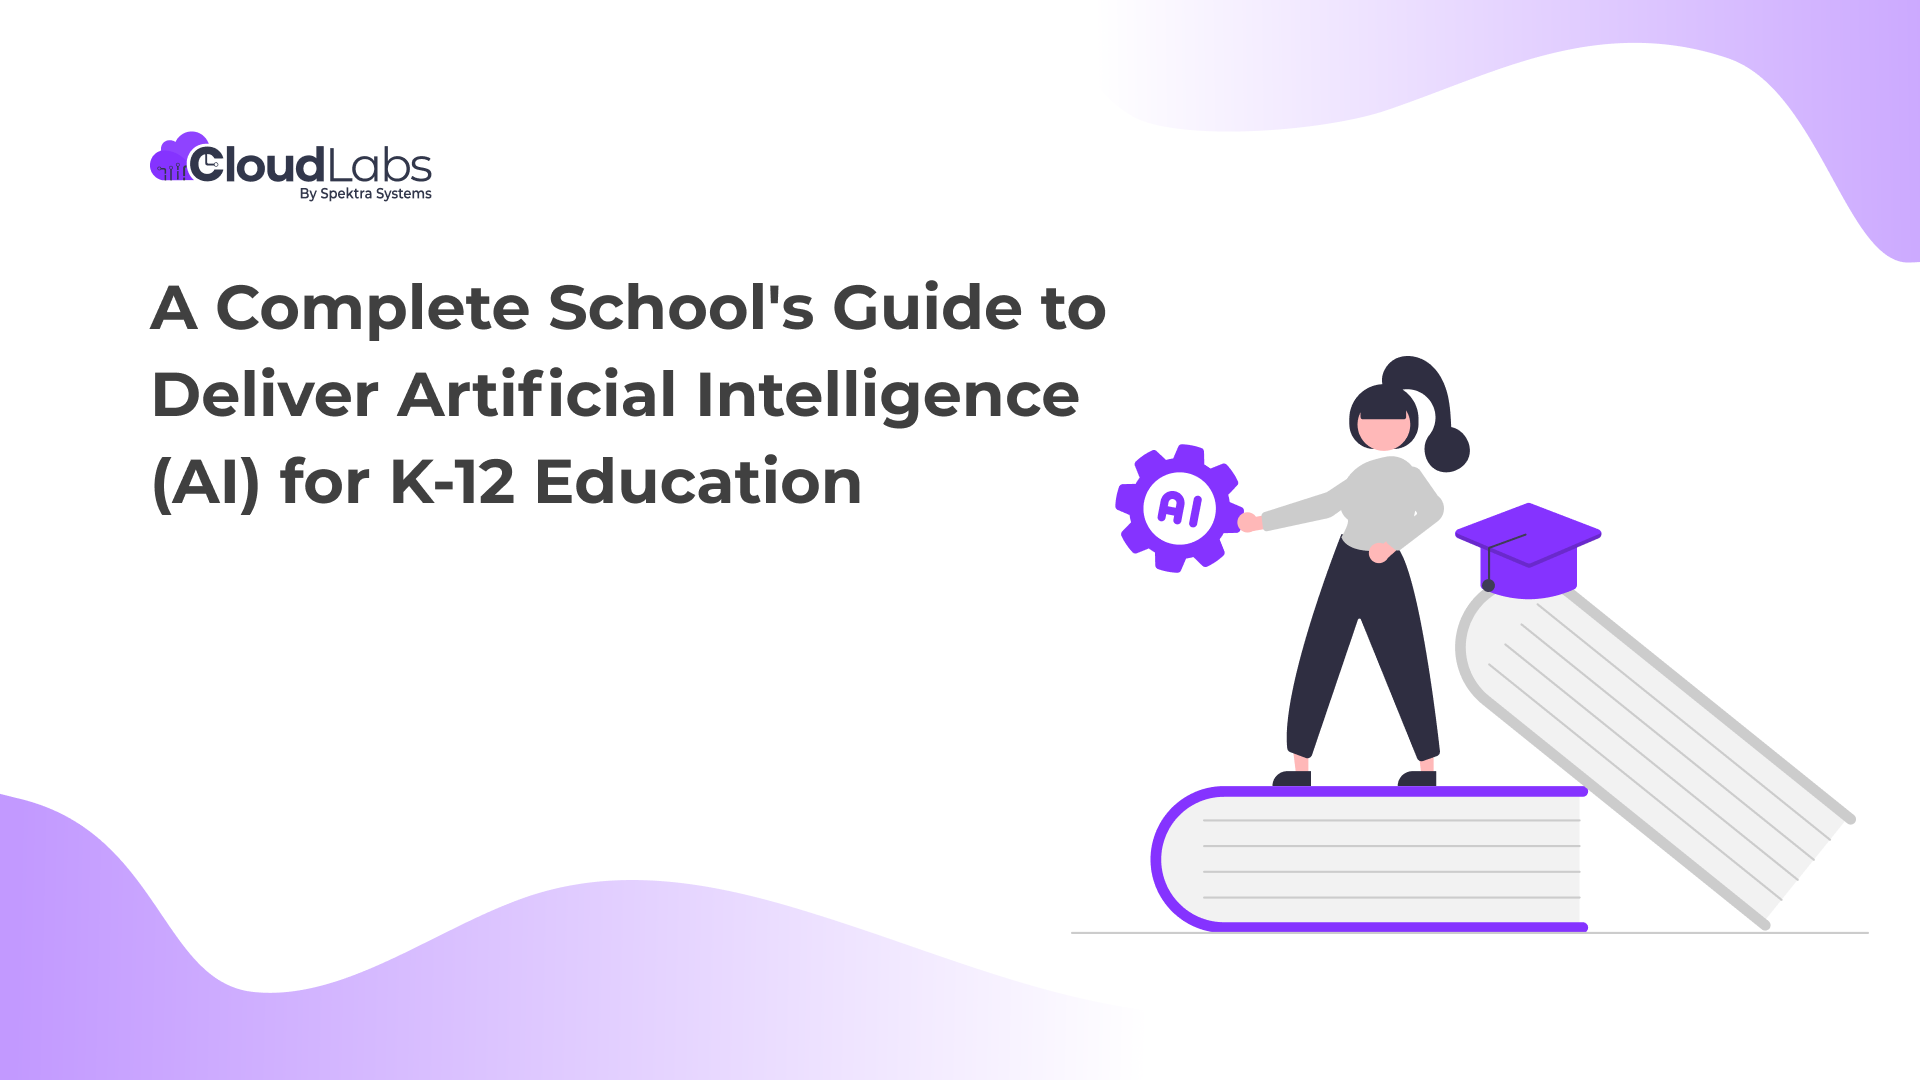 A Complete School’s Guide to Deliver ArtificiaI Intelligence (AI) for K-12 Education